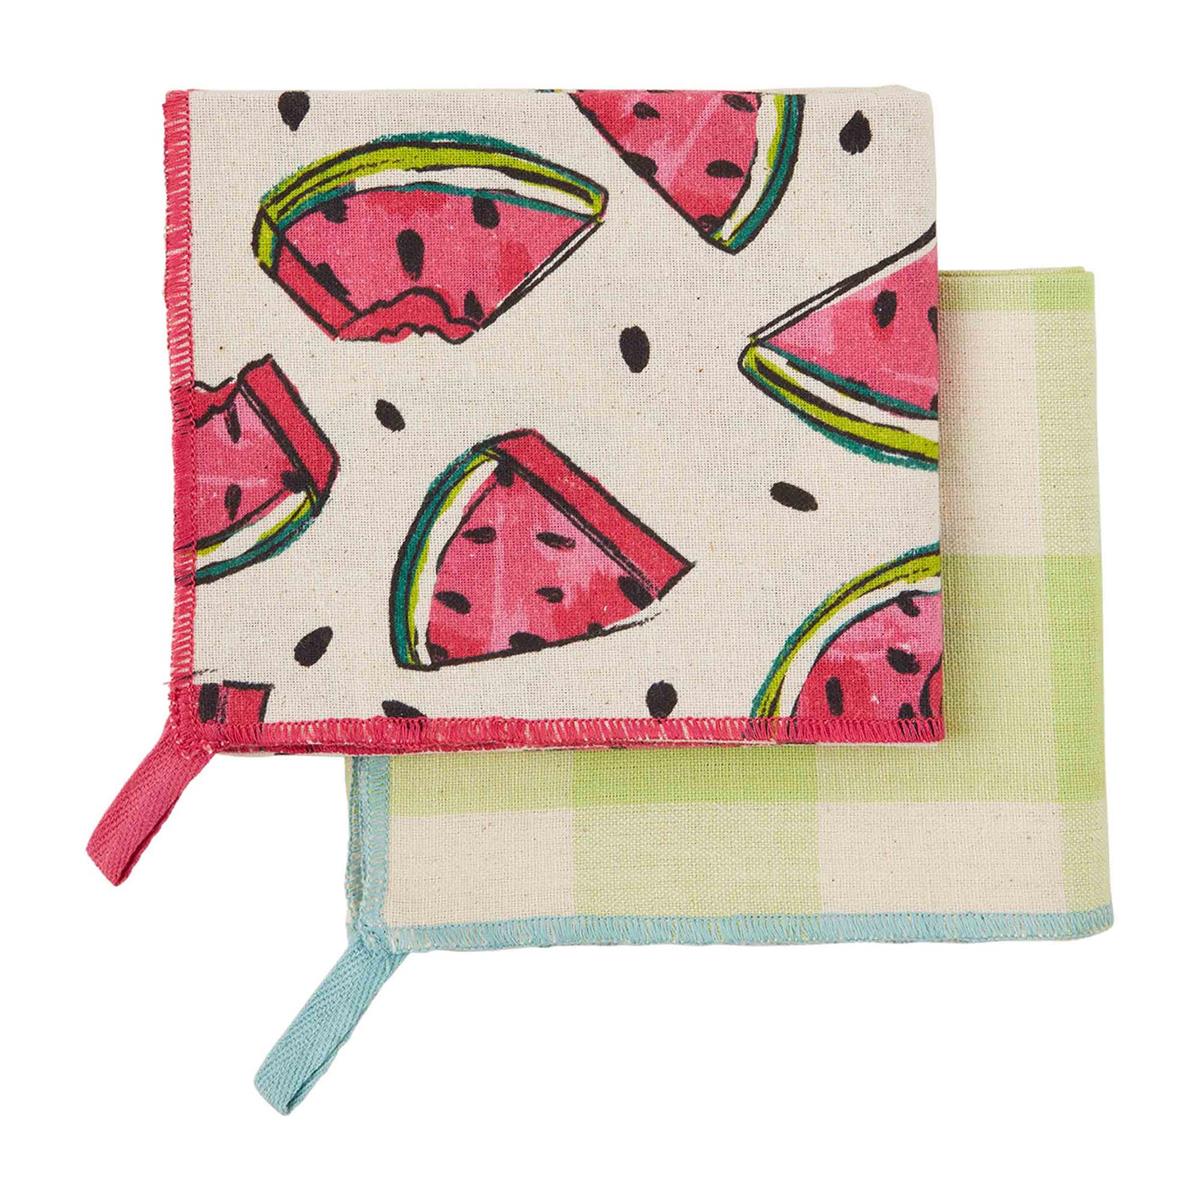 watermelon and green plaid towels on a white background